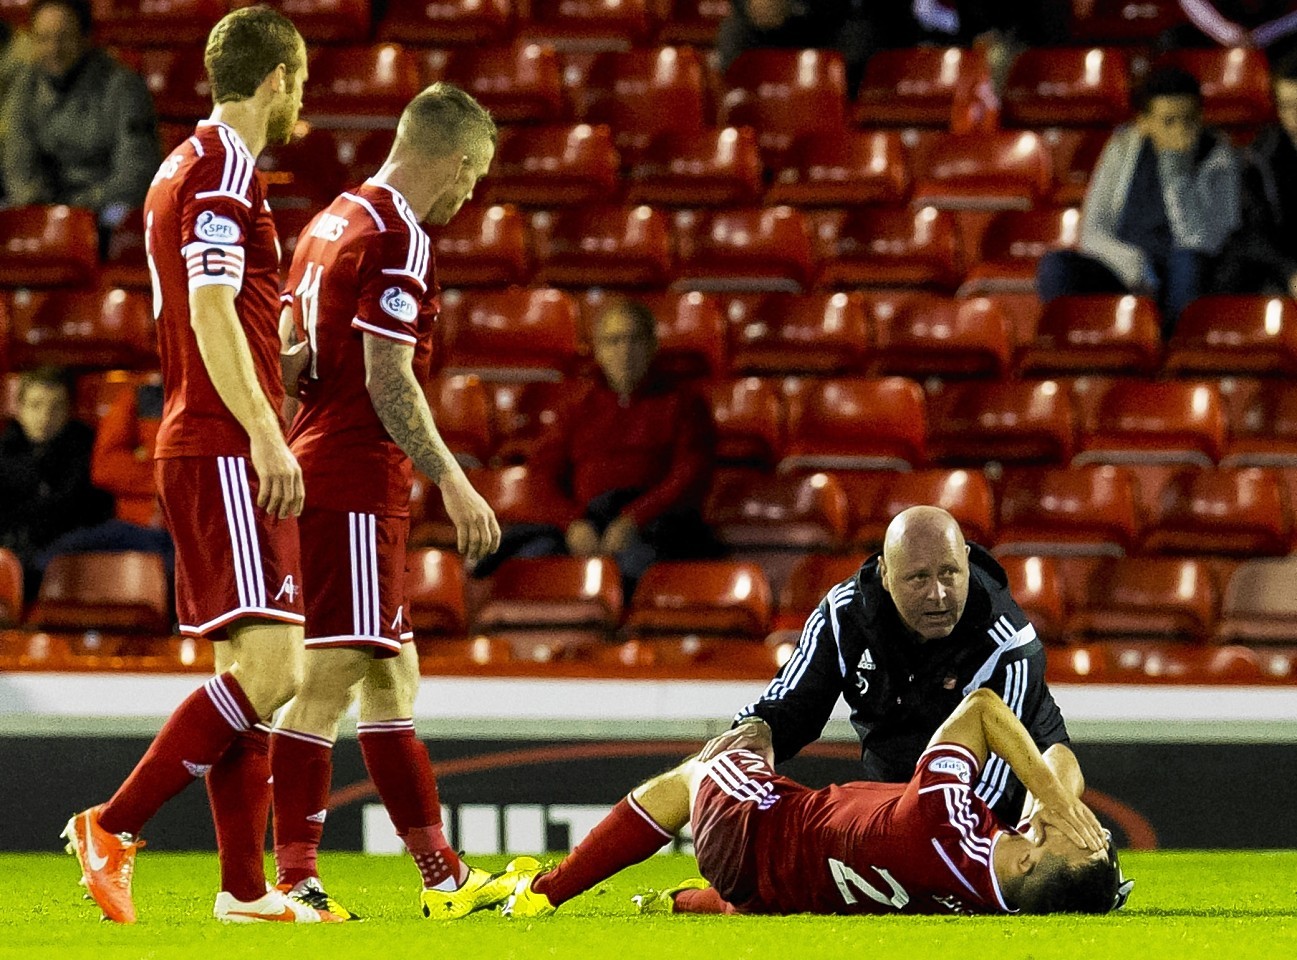 Jack required treatment on the Pittodrie pitch before he was stretchered off 